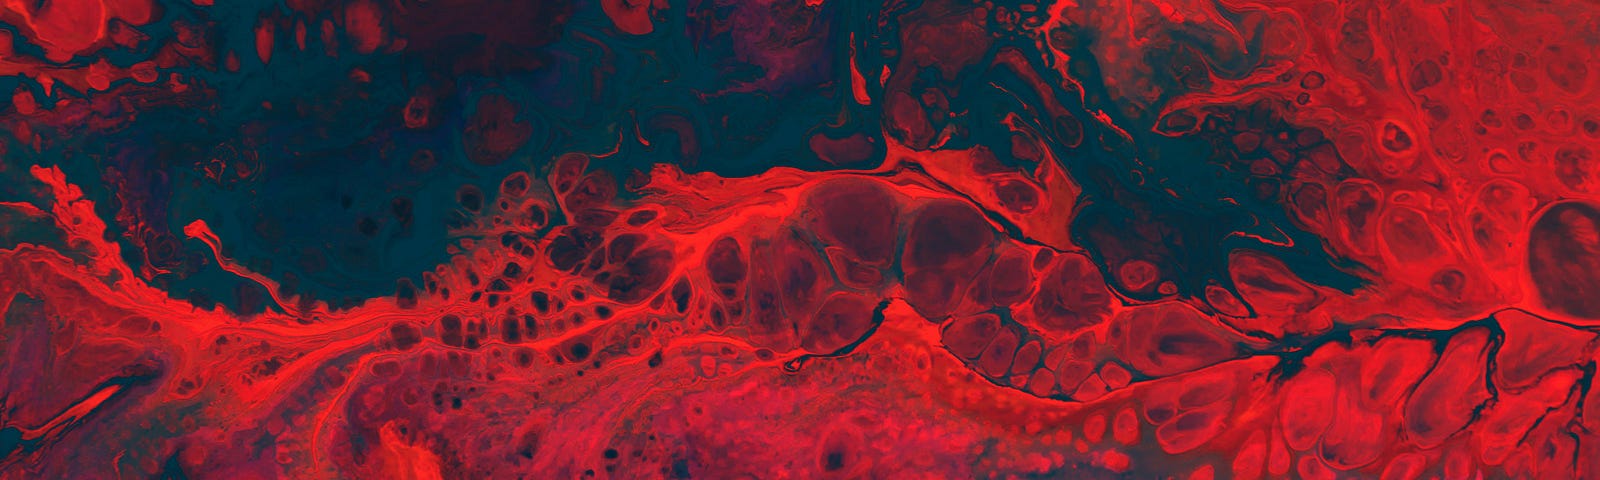 Swirling red black abstract.